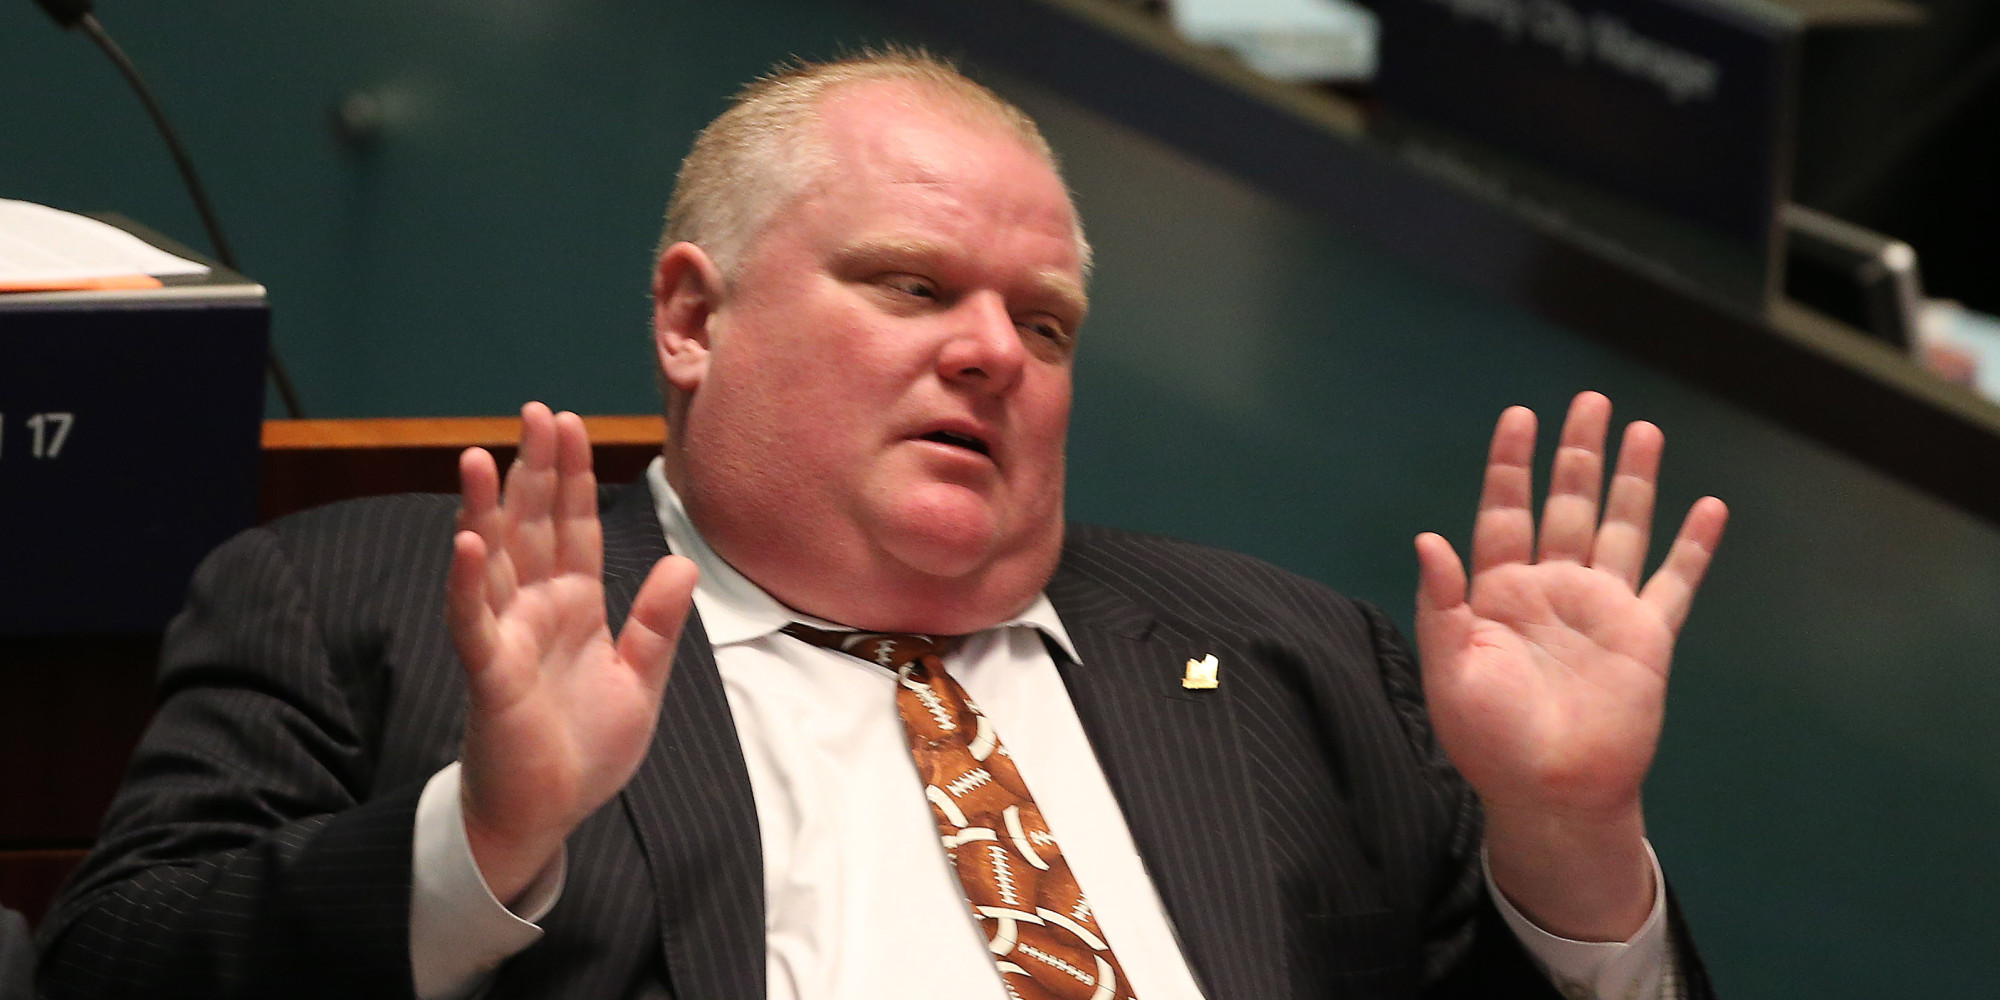 Rob ford weight loss march 19 #3